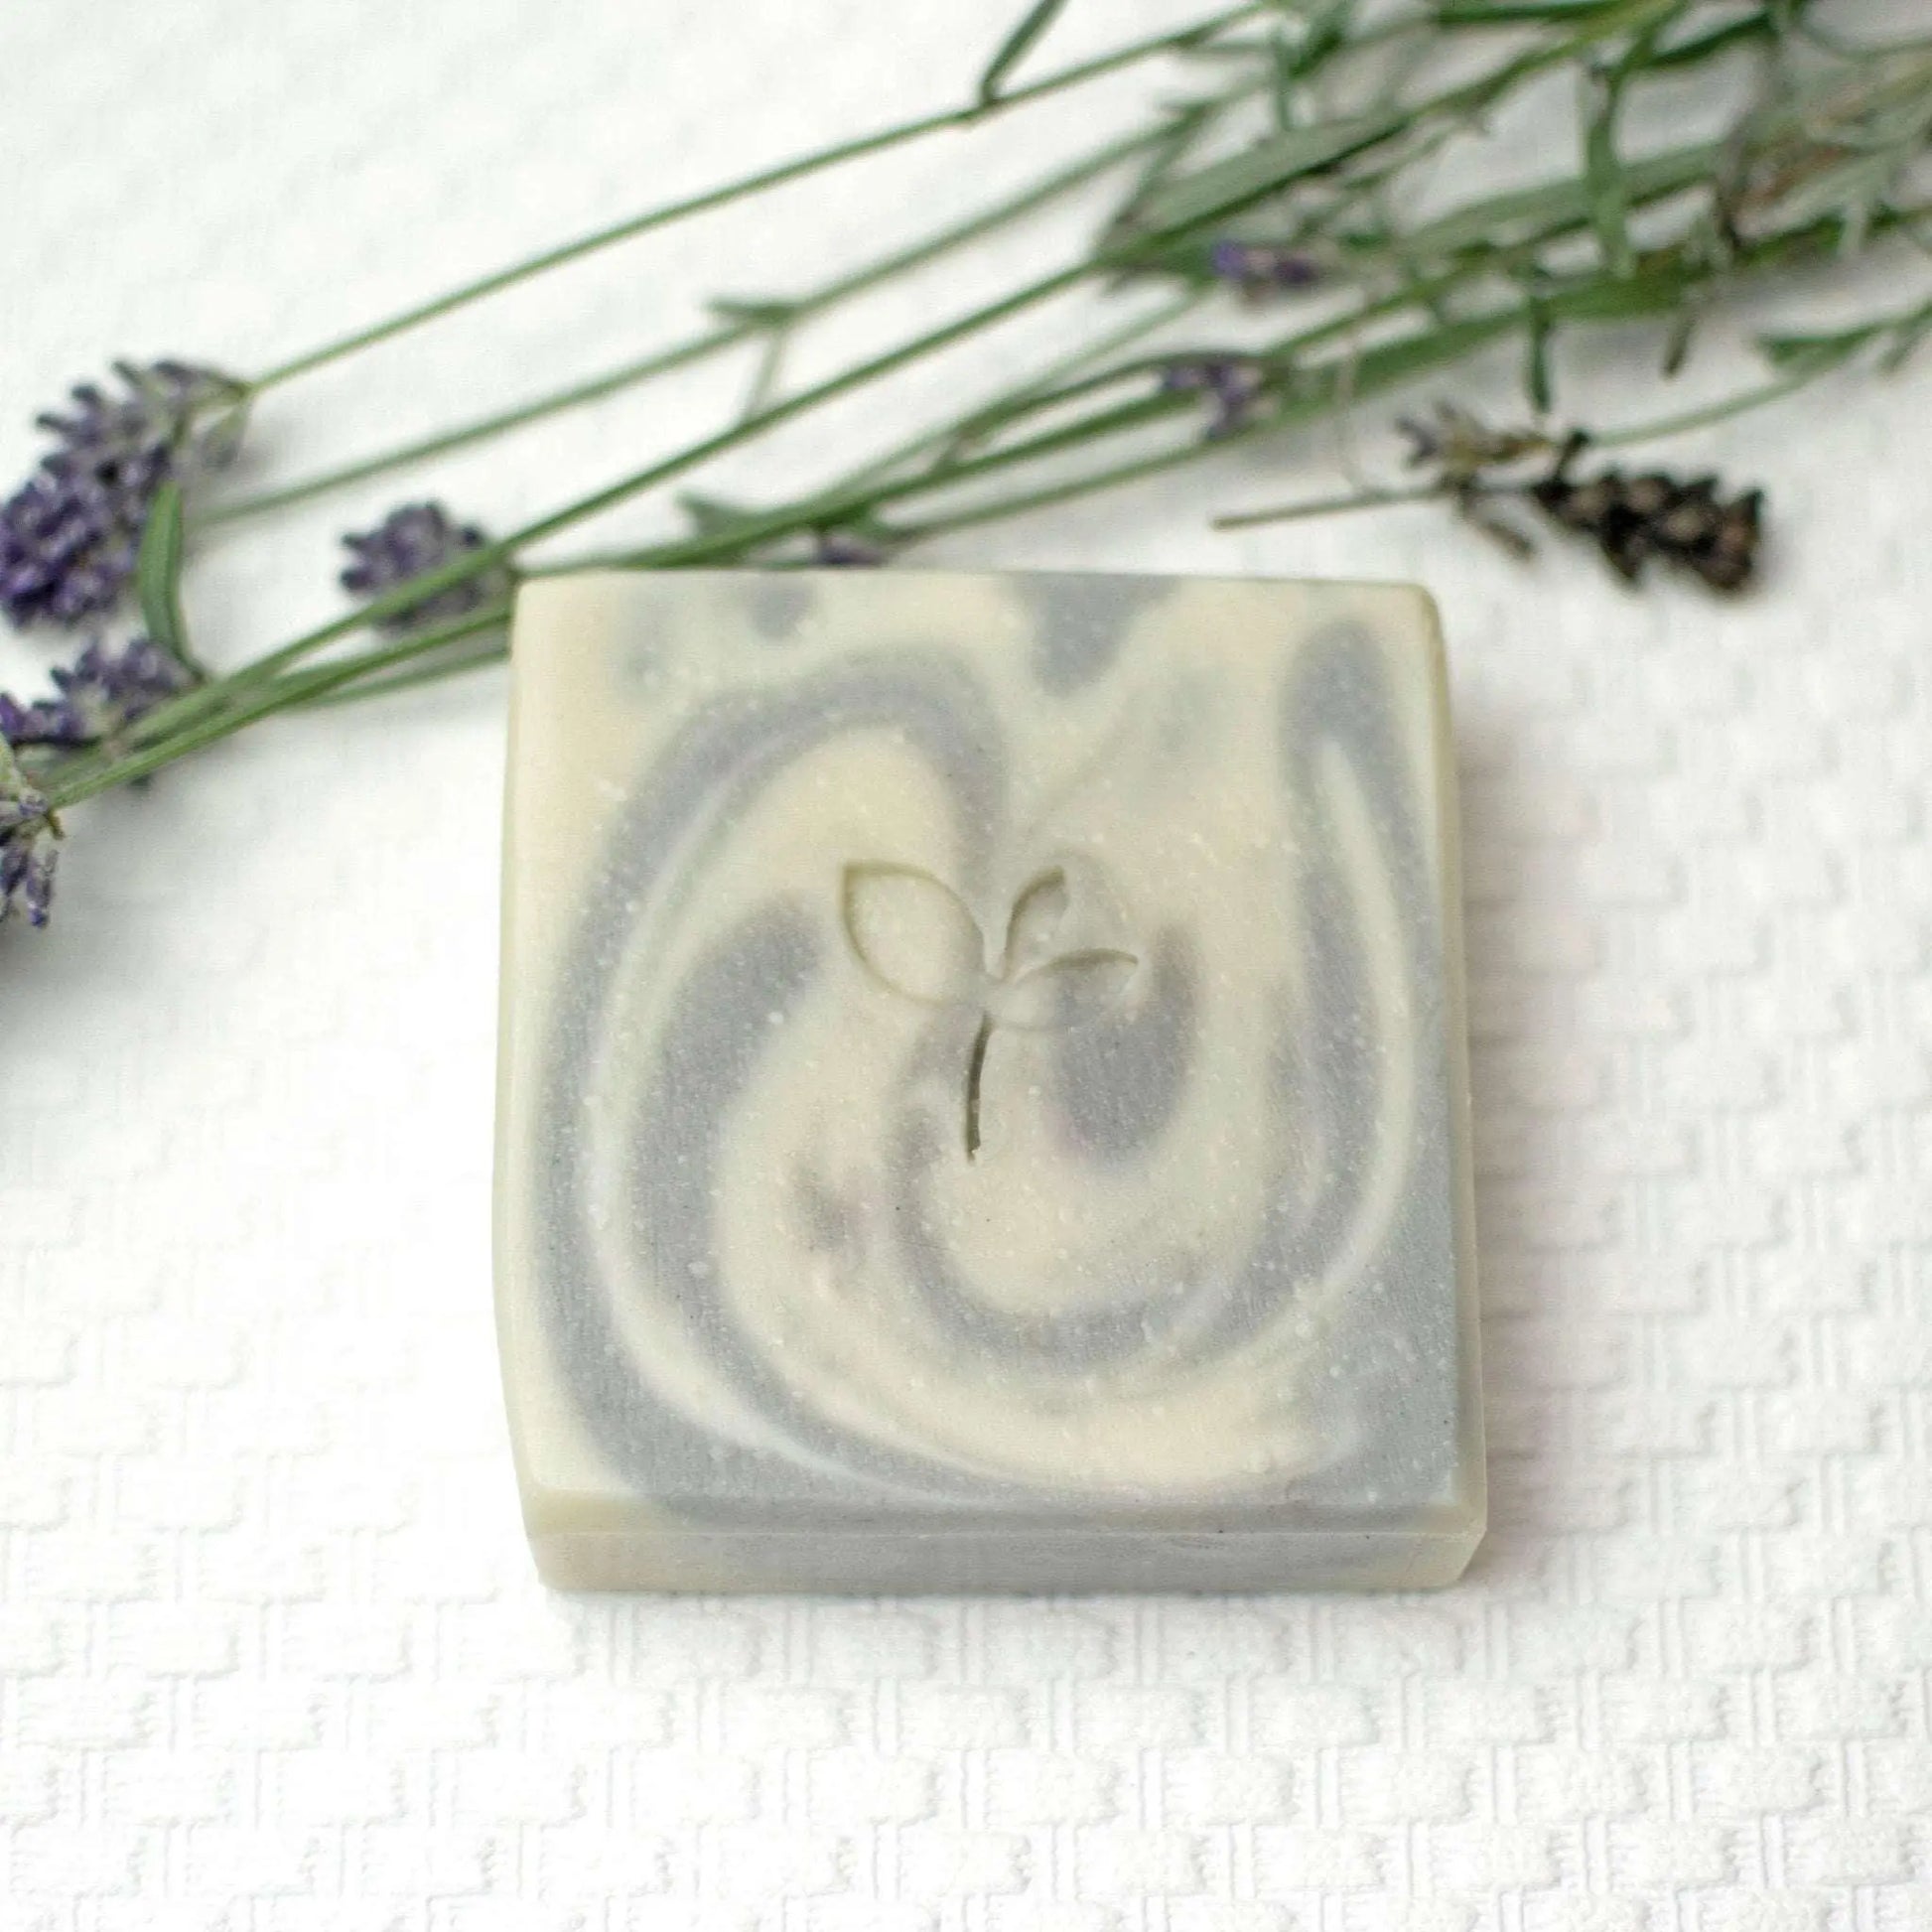 Summer Rain - natural soap with black pepper and lavender - Silktown Soap Company